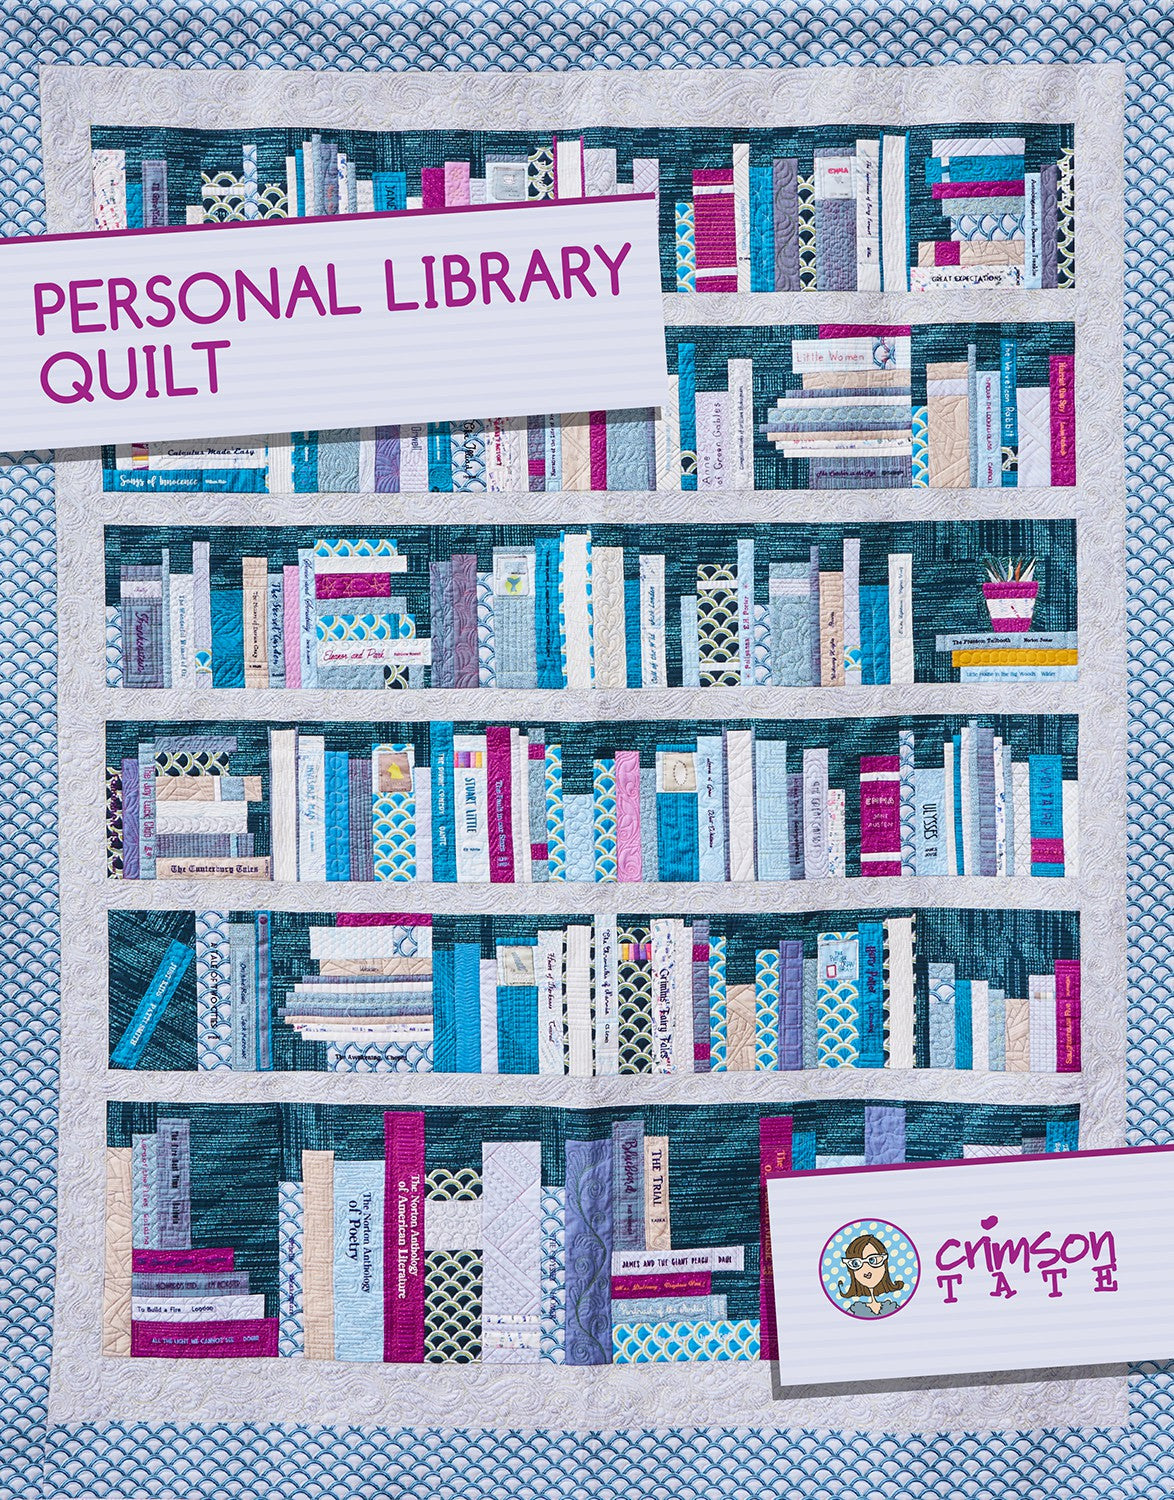 Personal Library Quilt Pattern by Heather Givans for Crimson Tate